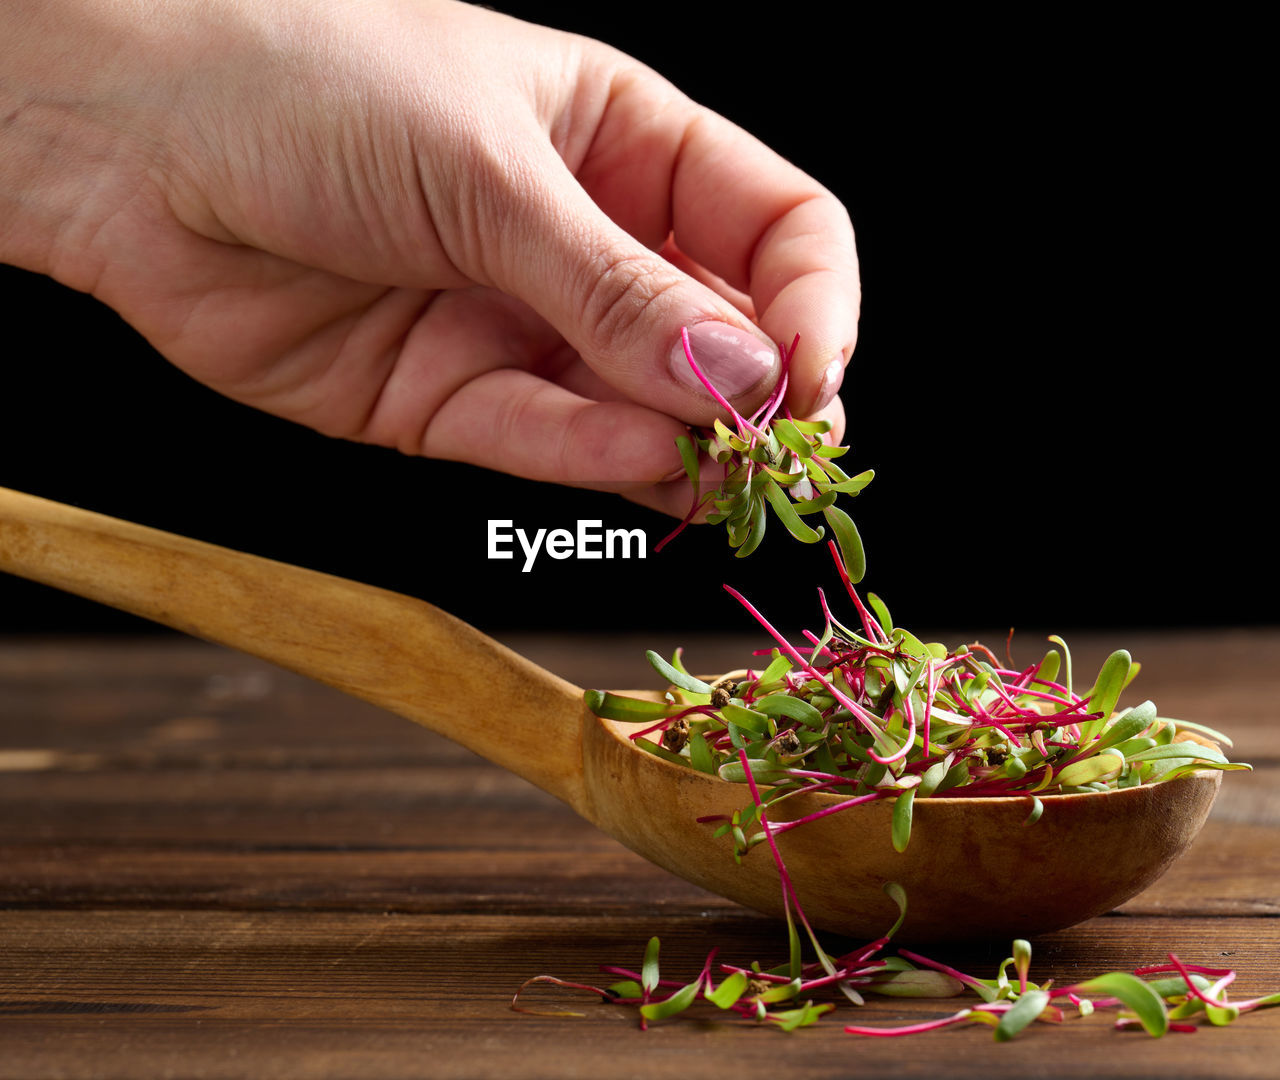 Fresh beet sprouts in a wooden spoon on the table and a female hand. microgreen for salad, detox